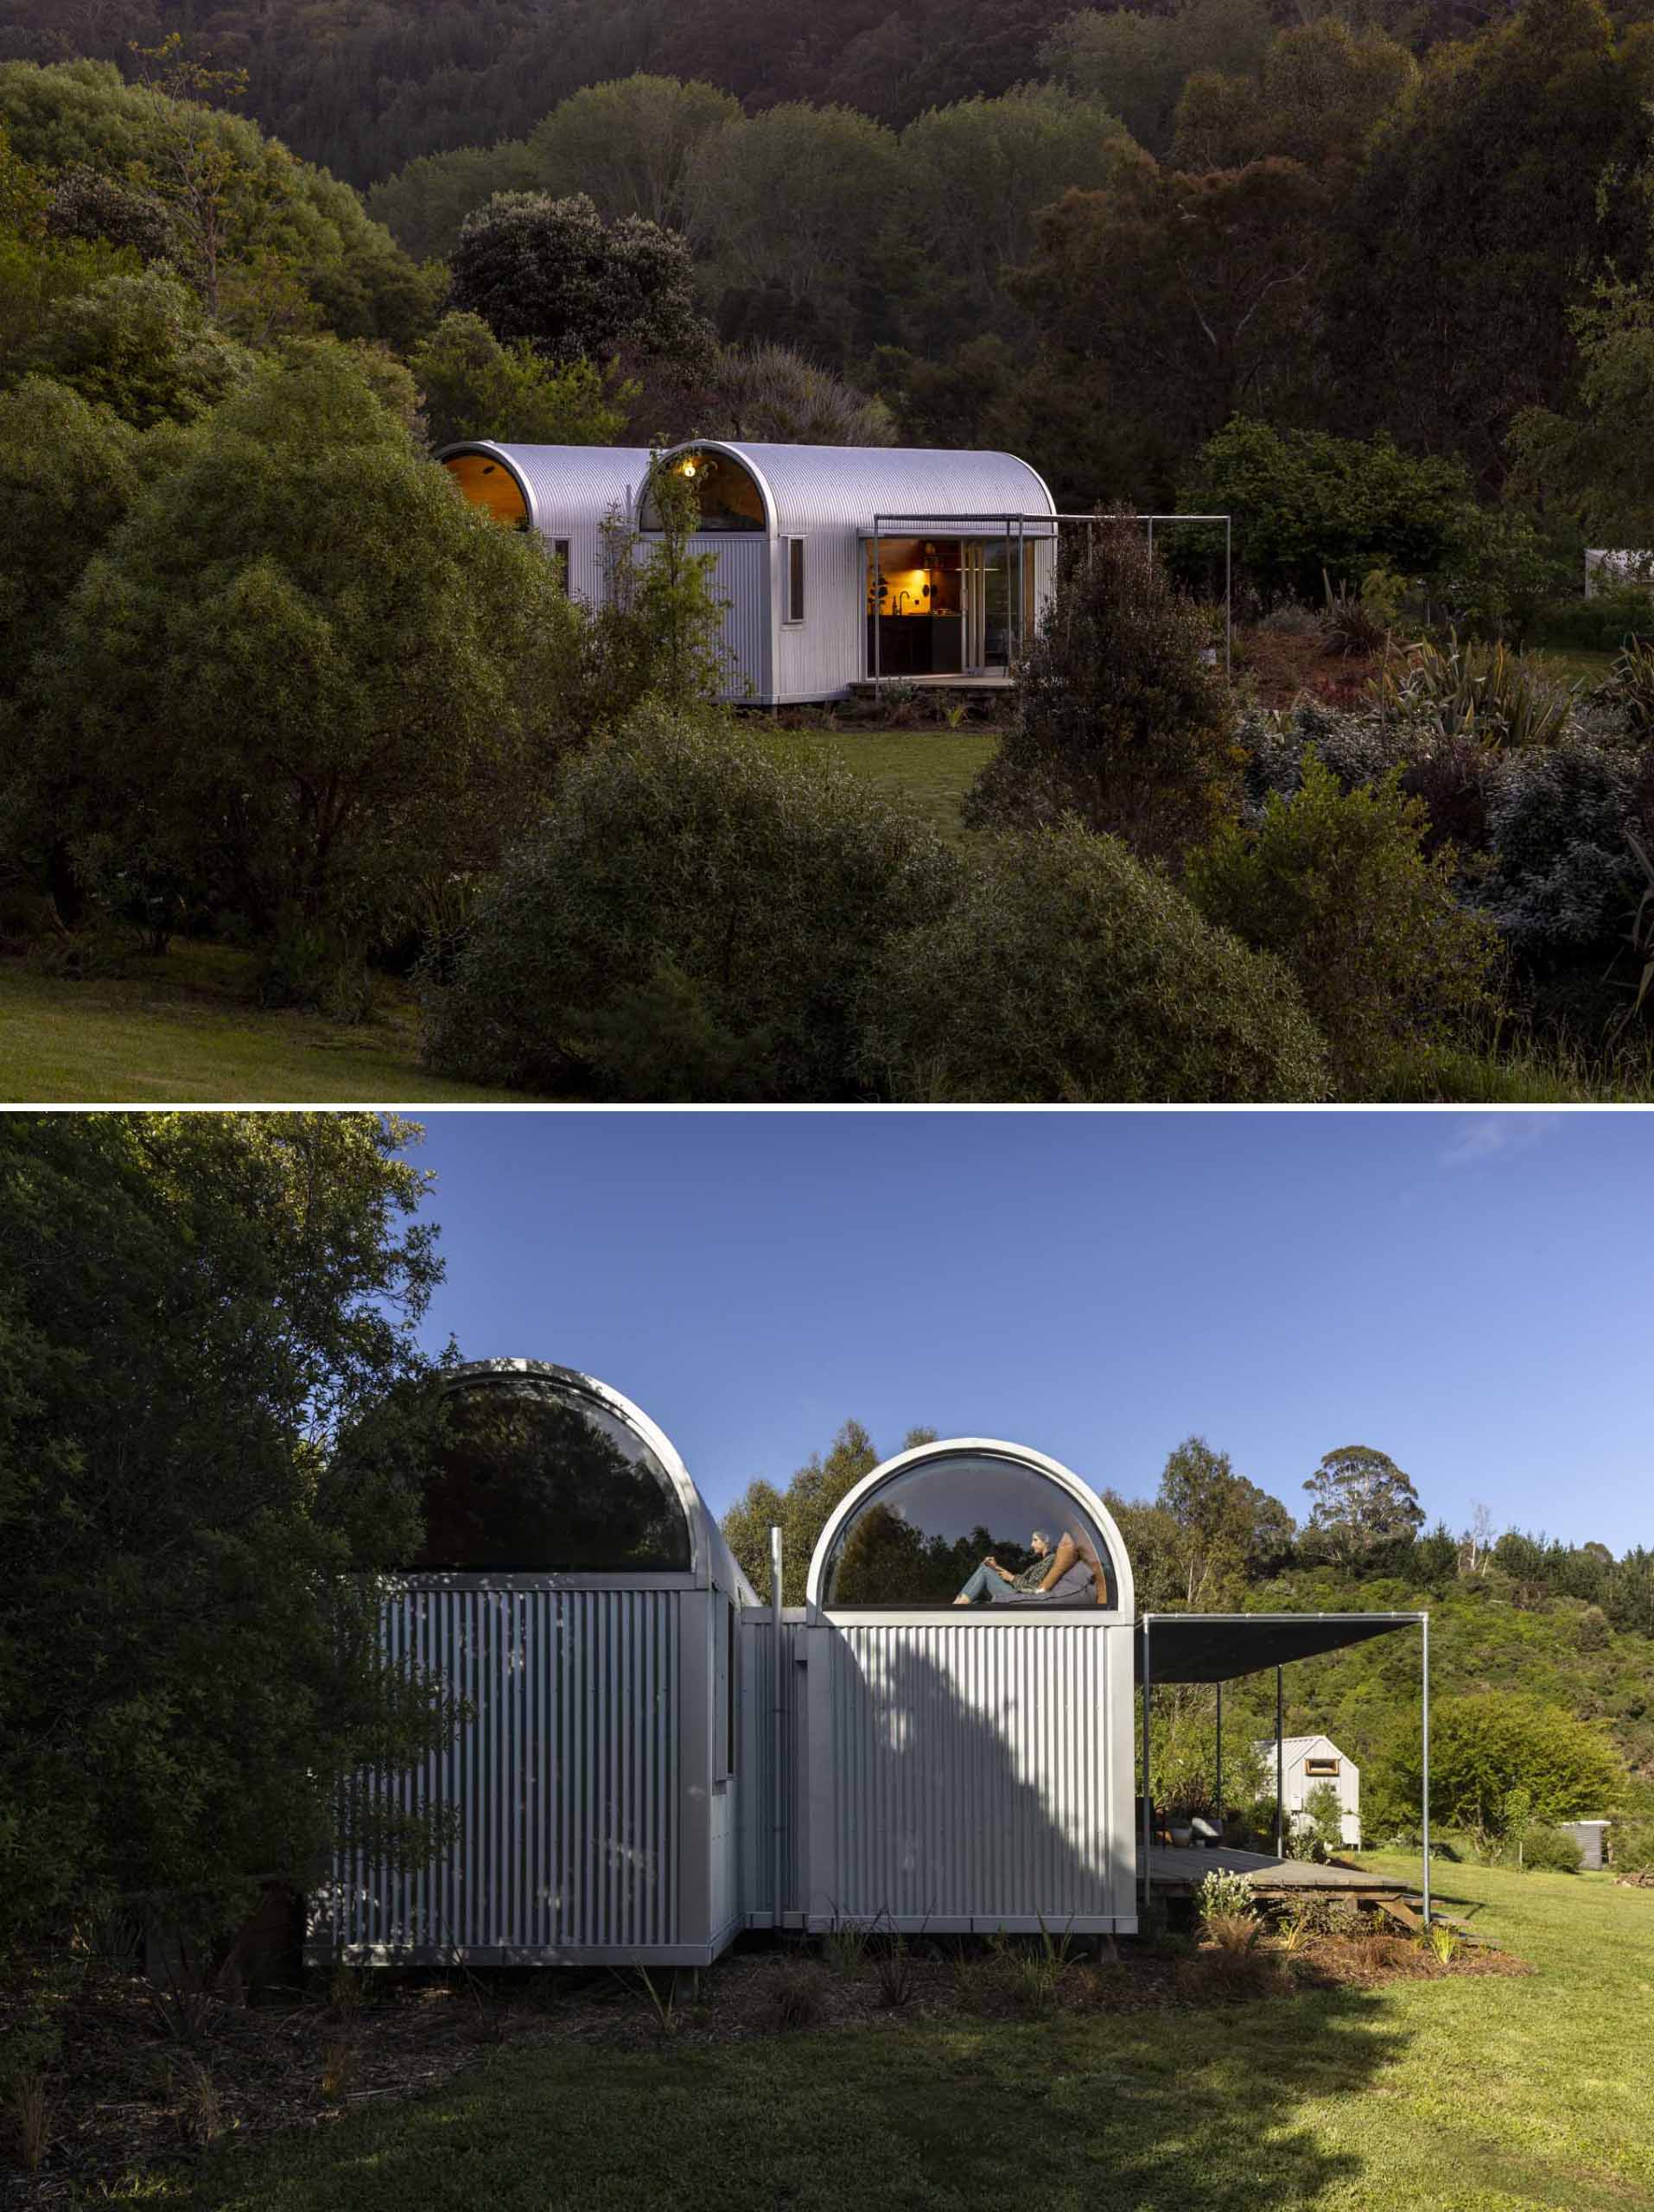 A modern and small one-bedroom home with a study, kitchen, loft, and curved roof.